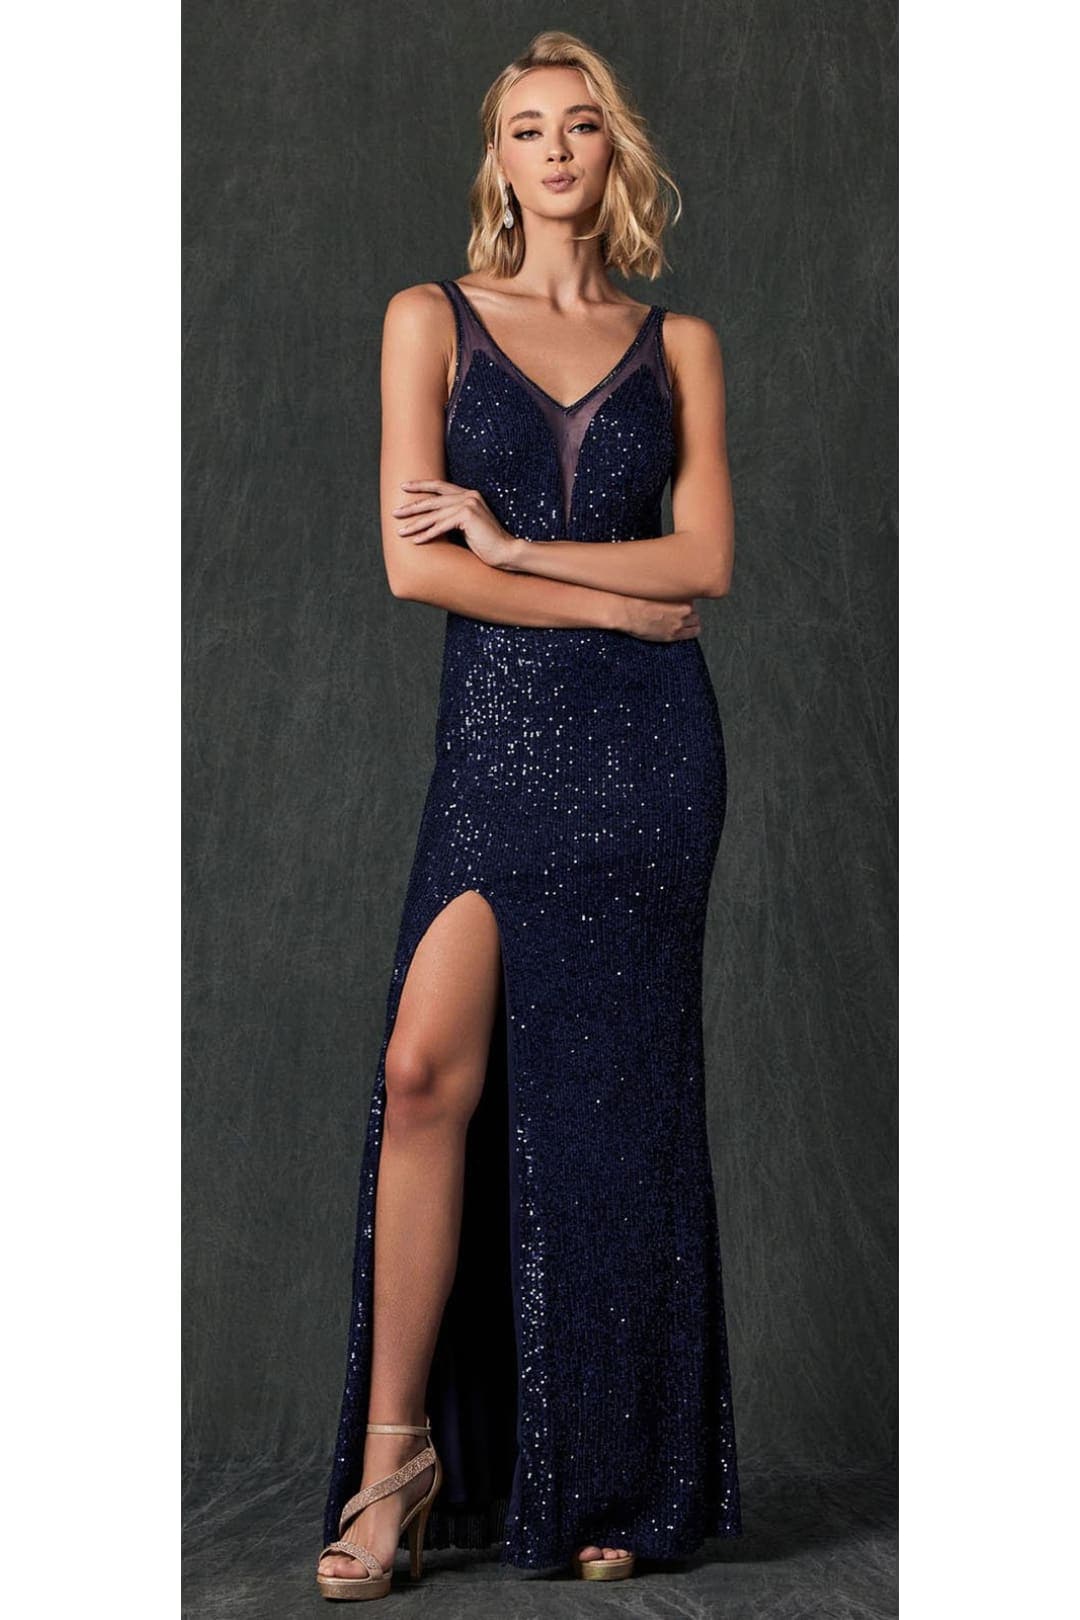 Prom Sequined Formal Gown - NAVY BLUE / XS